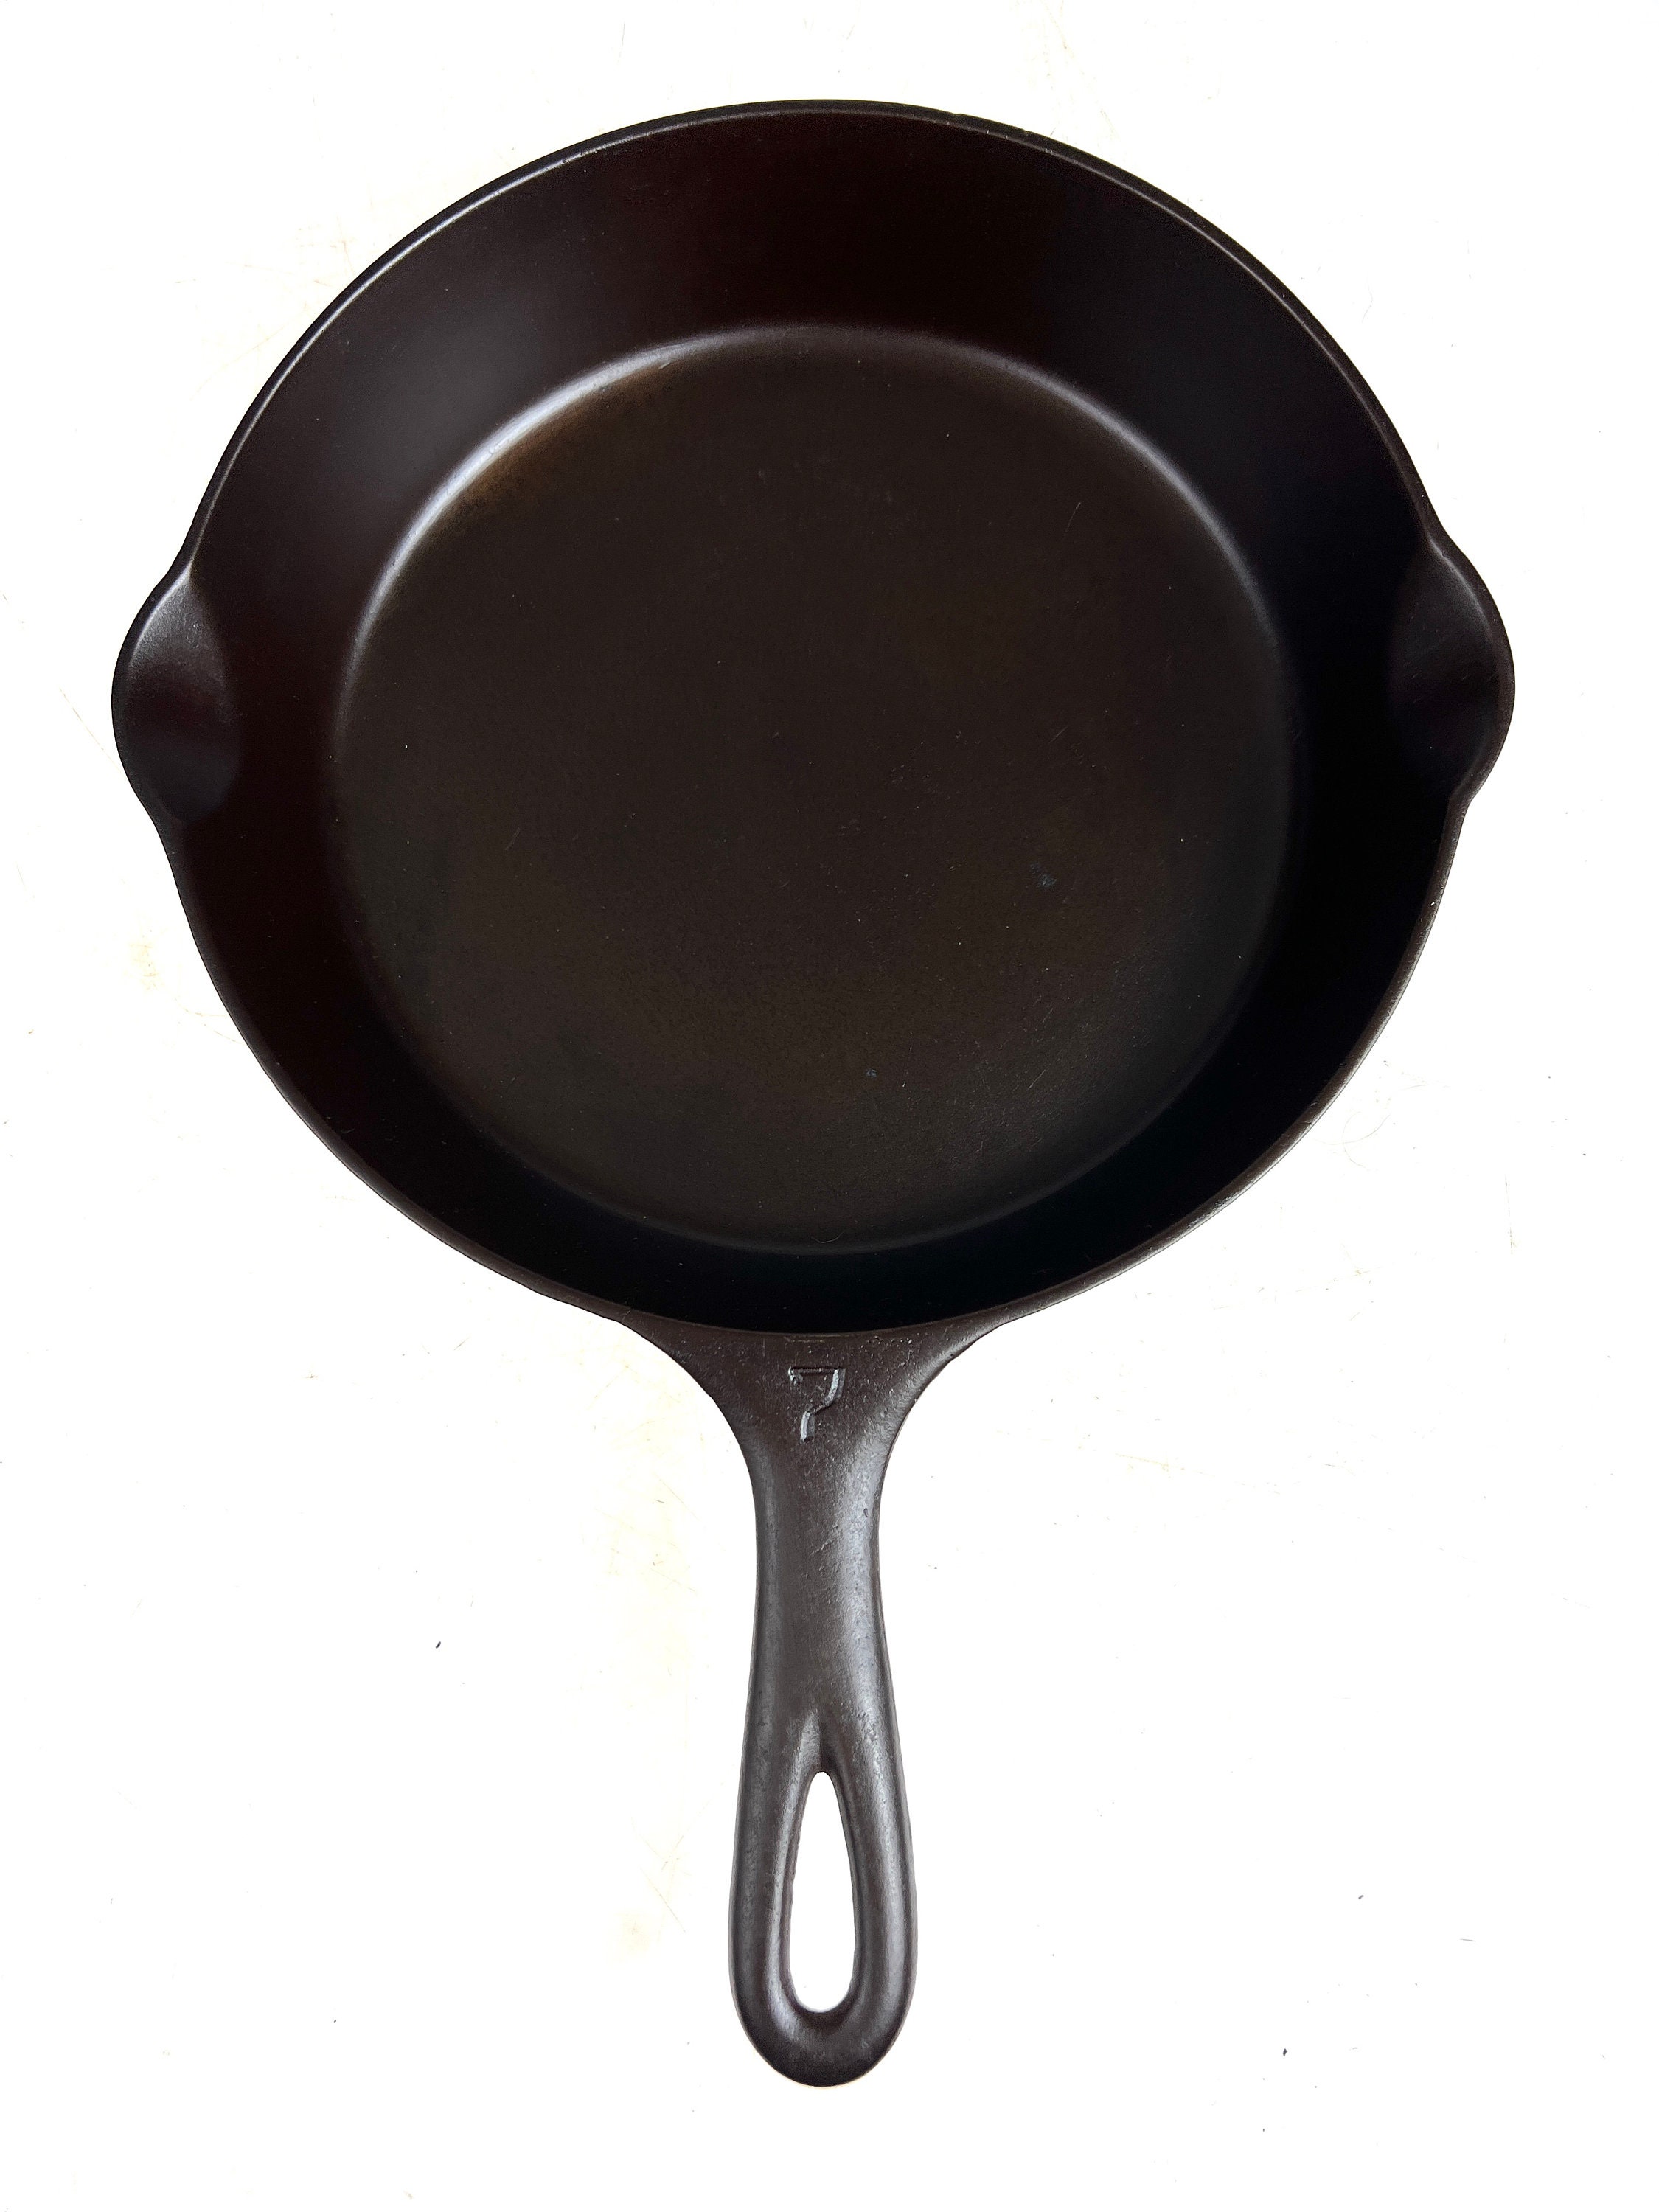 File:Griswold cast iron skillet.jpg - Wikimedia Commons